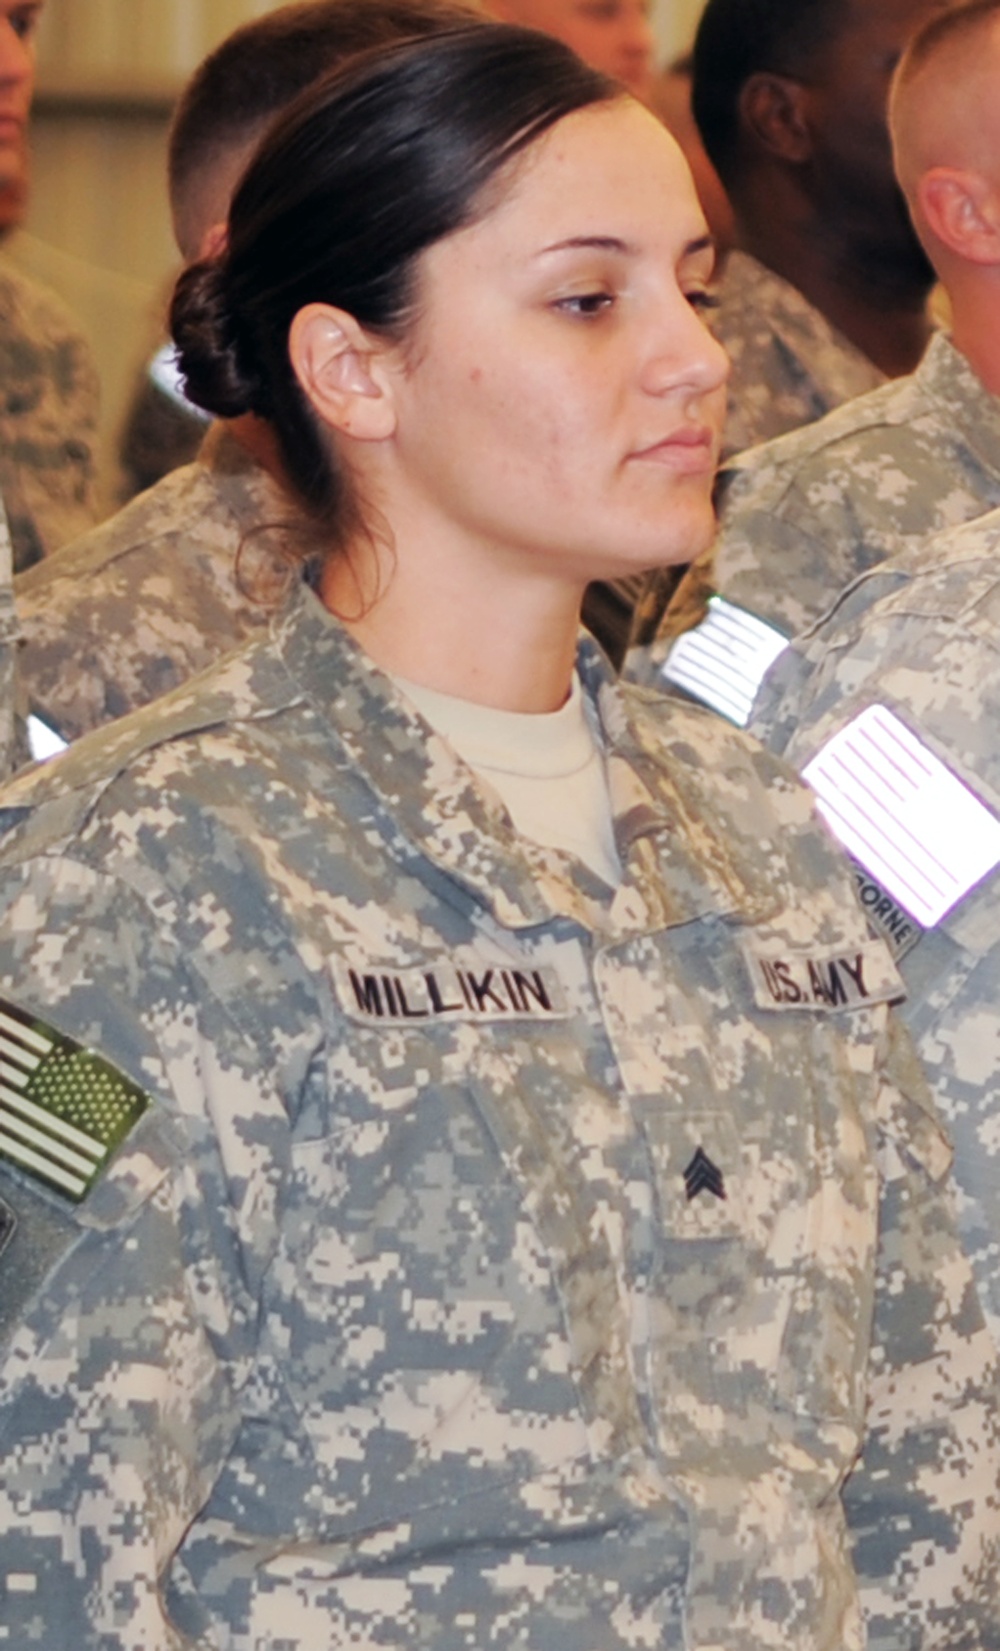 New Mexico Native, Fort Bragg Sergeant, Serves As Battle NCO for Deployed Army Air Defense Unit